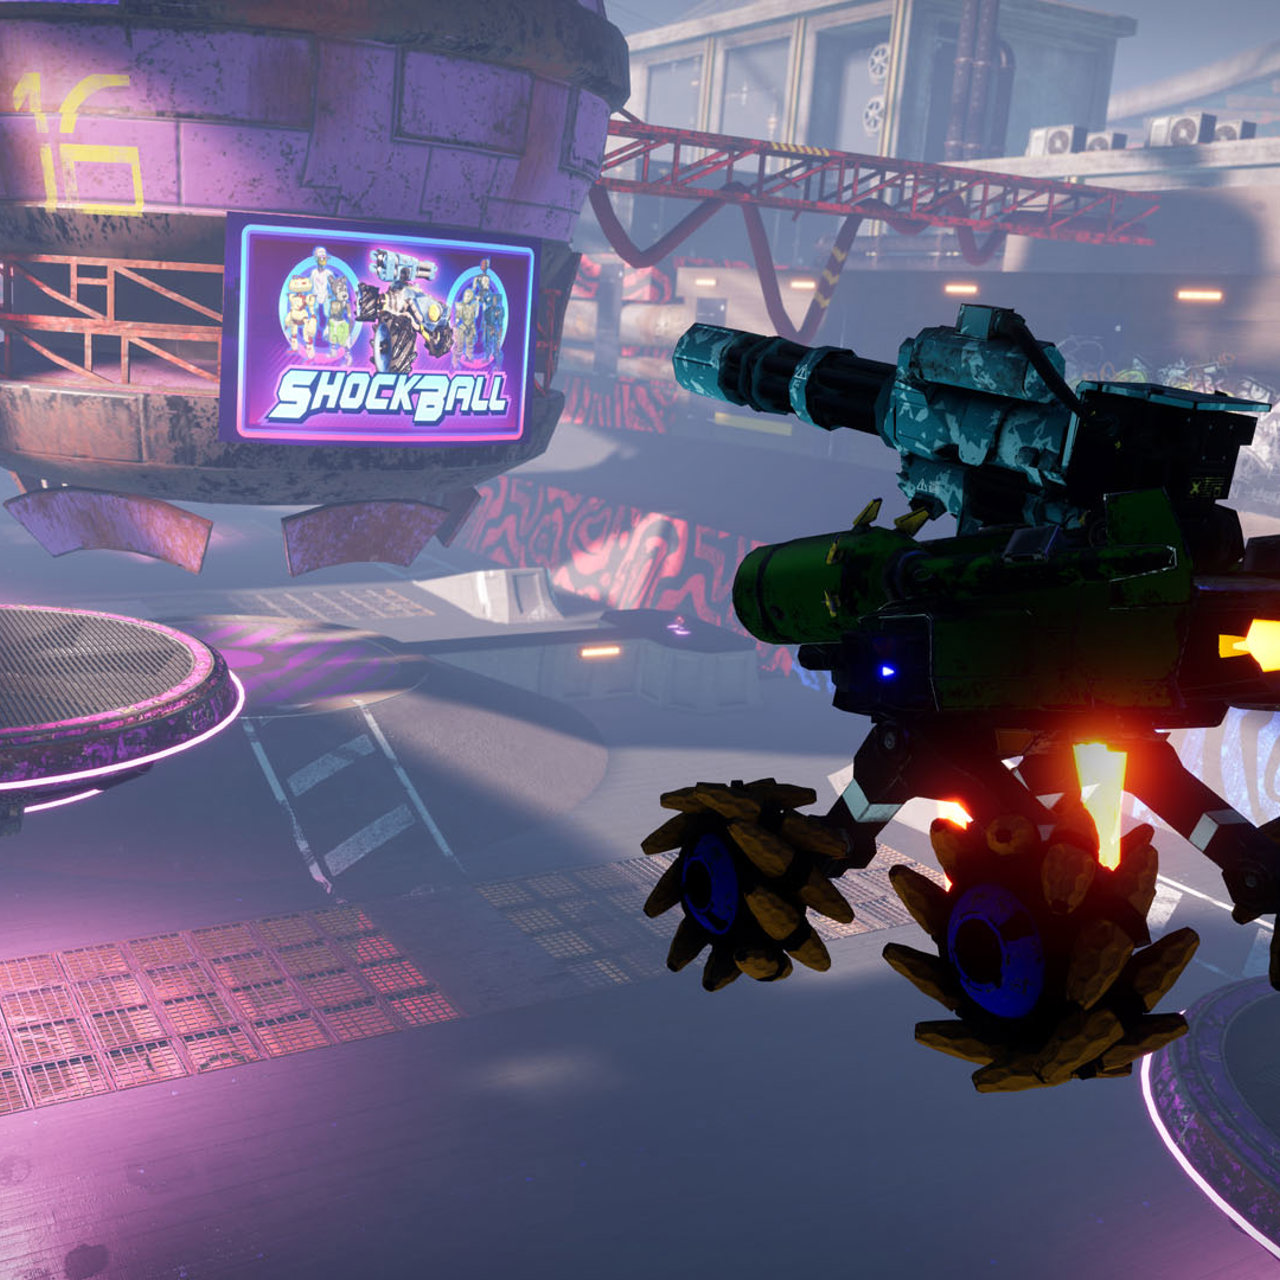 Game screenshot of an airborne vehicle with a billboard in the background that reads "Shockball"